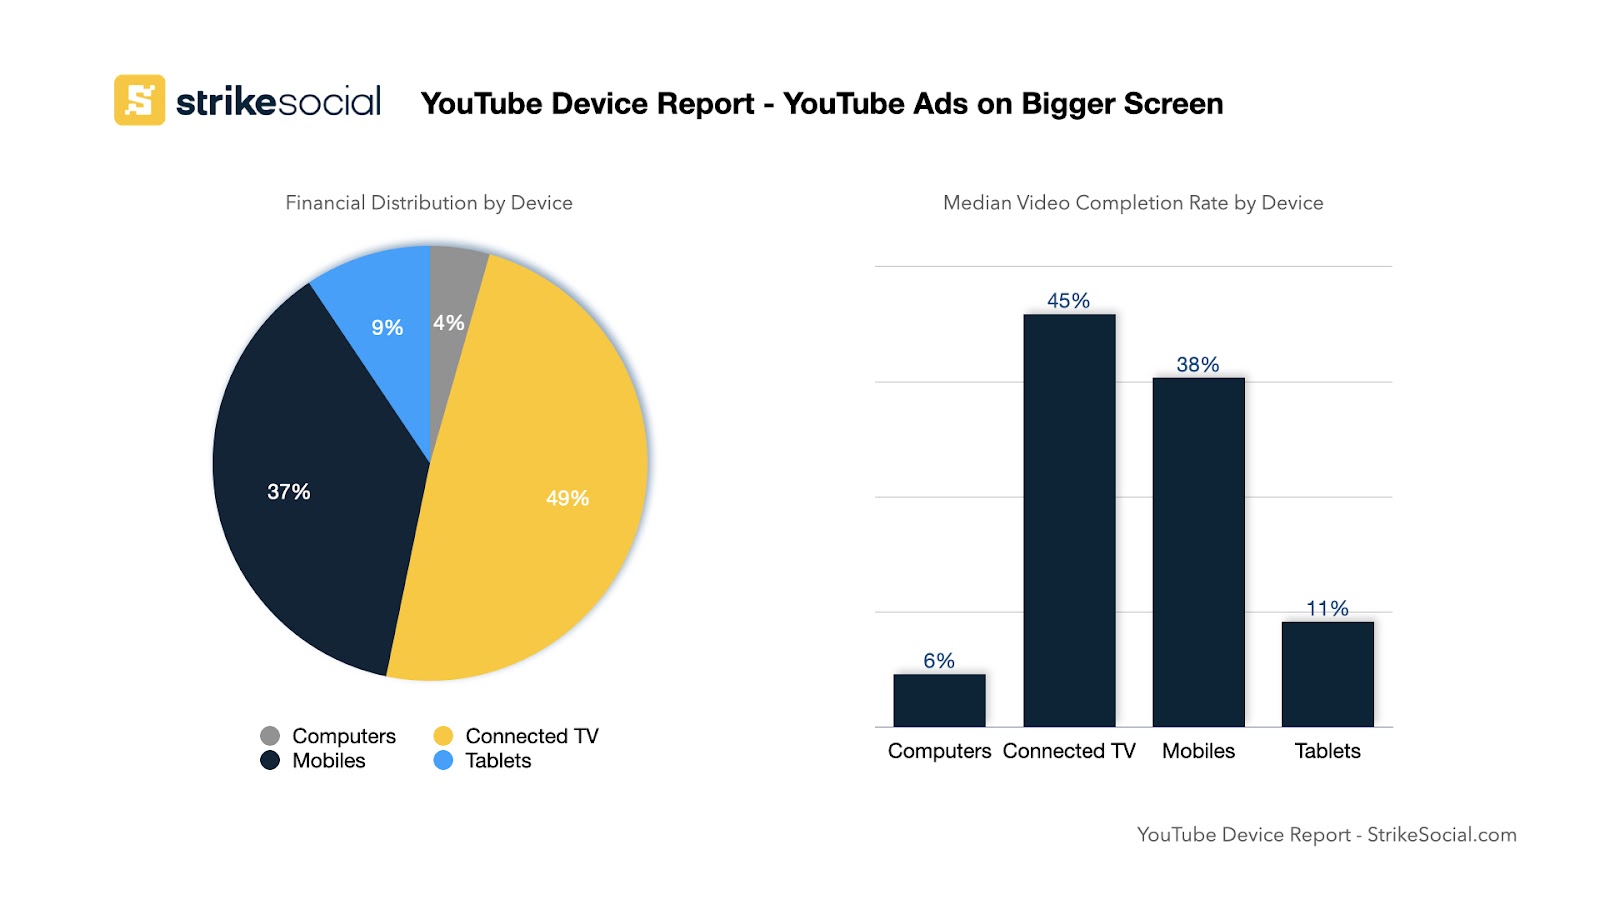 YouTube Device Report Ad Spend Share and Video Completion Rate